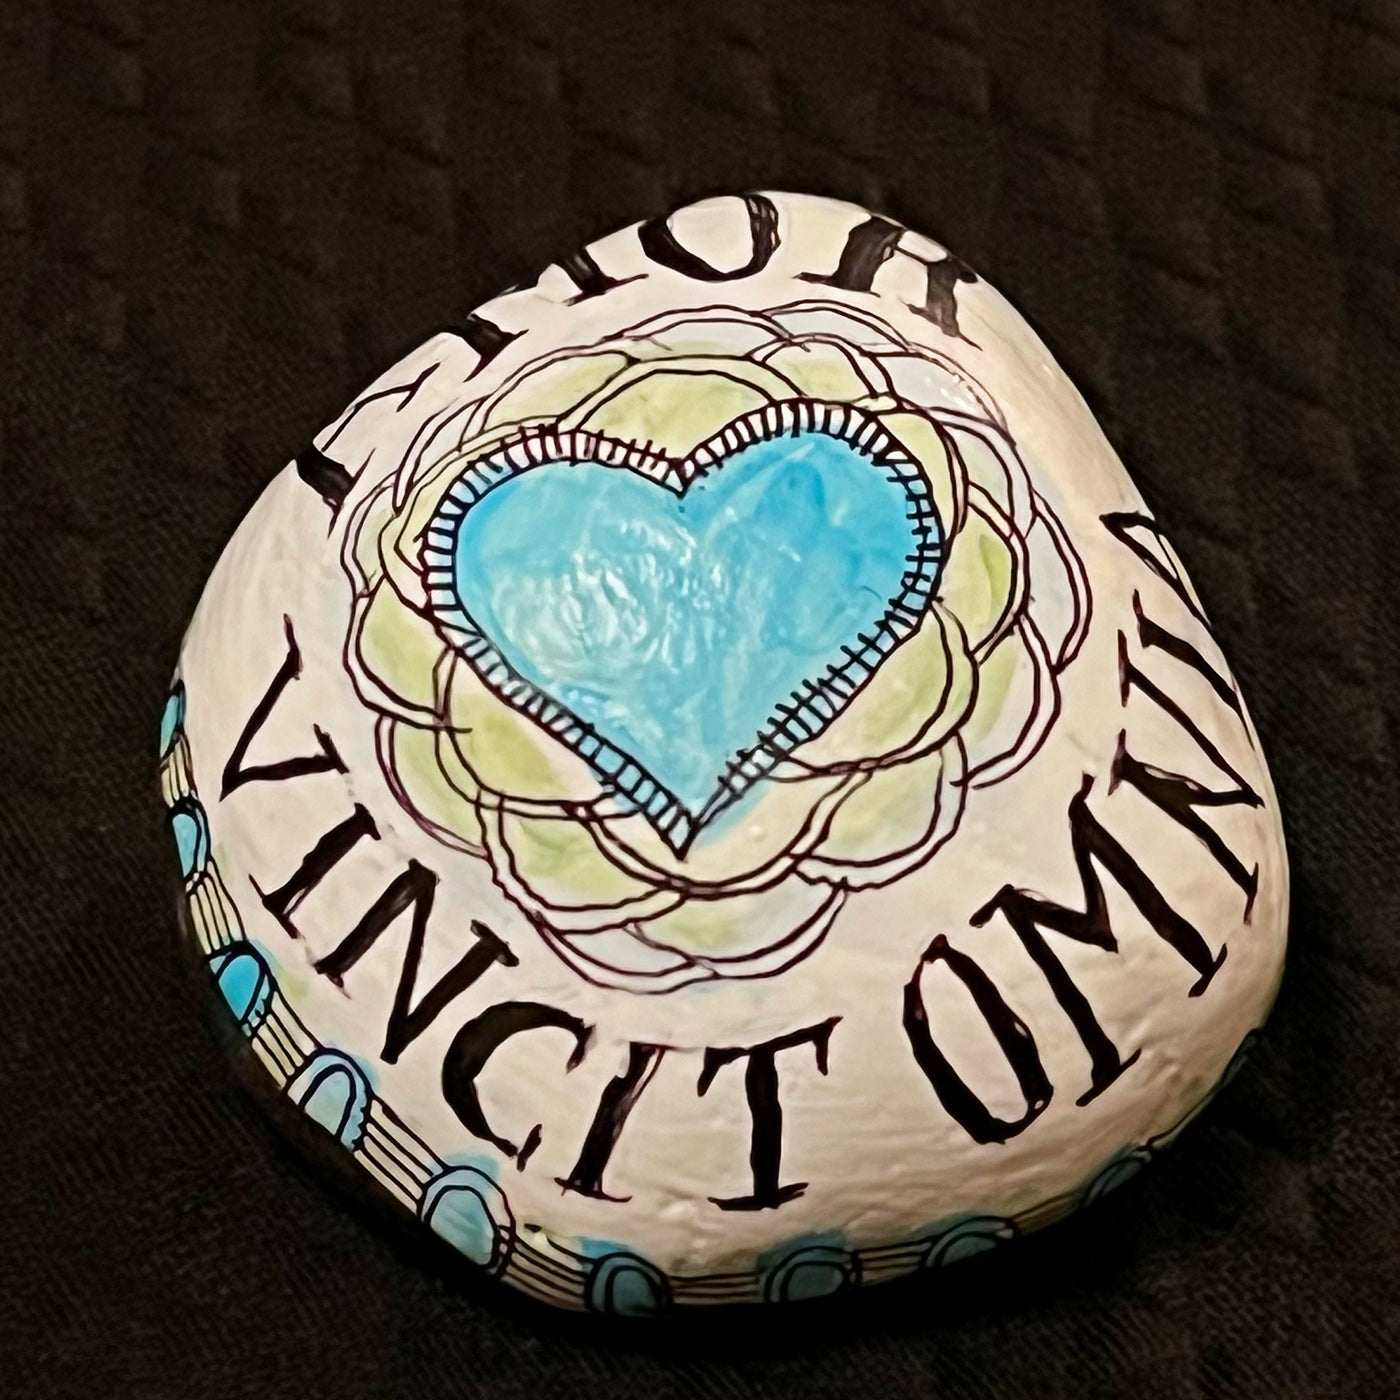 Hand painted stone - "Love Conquers All"